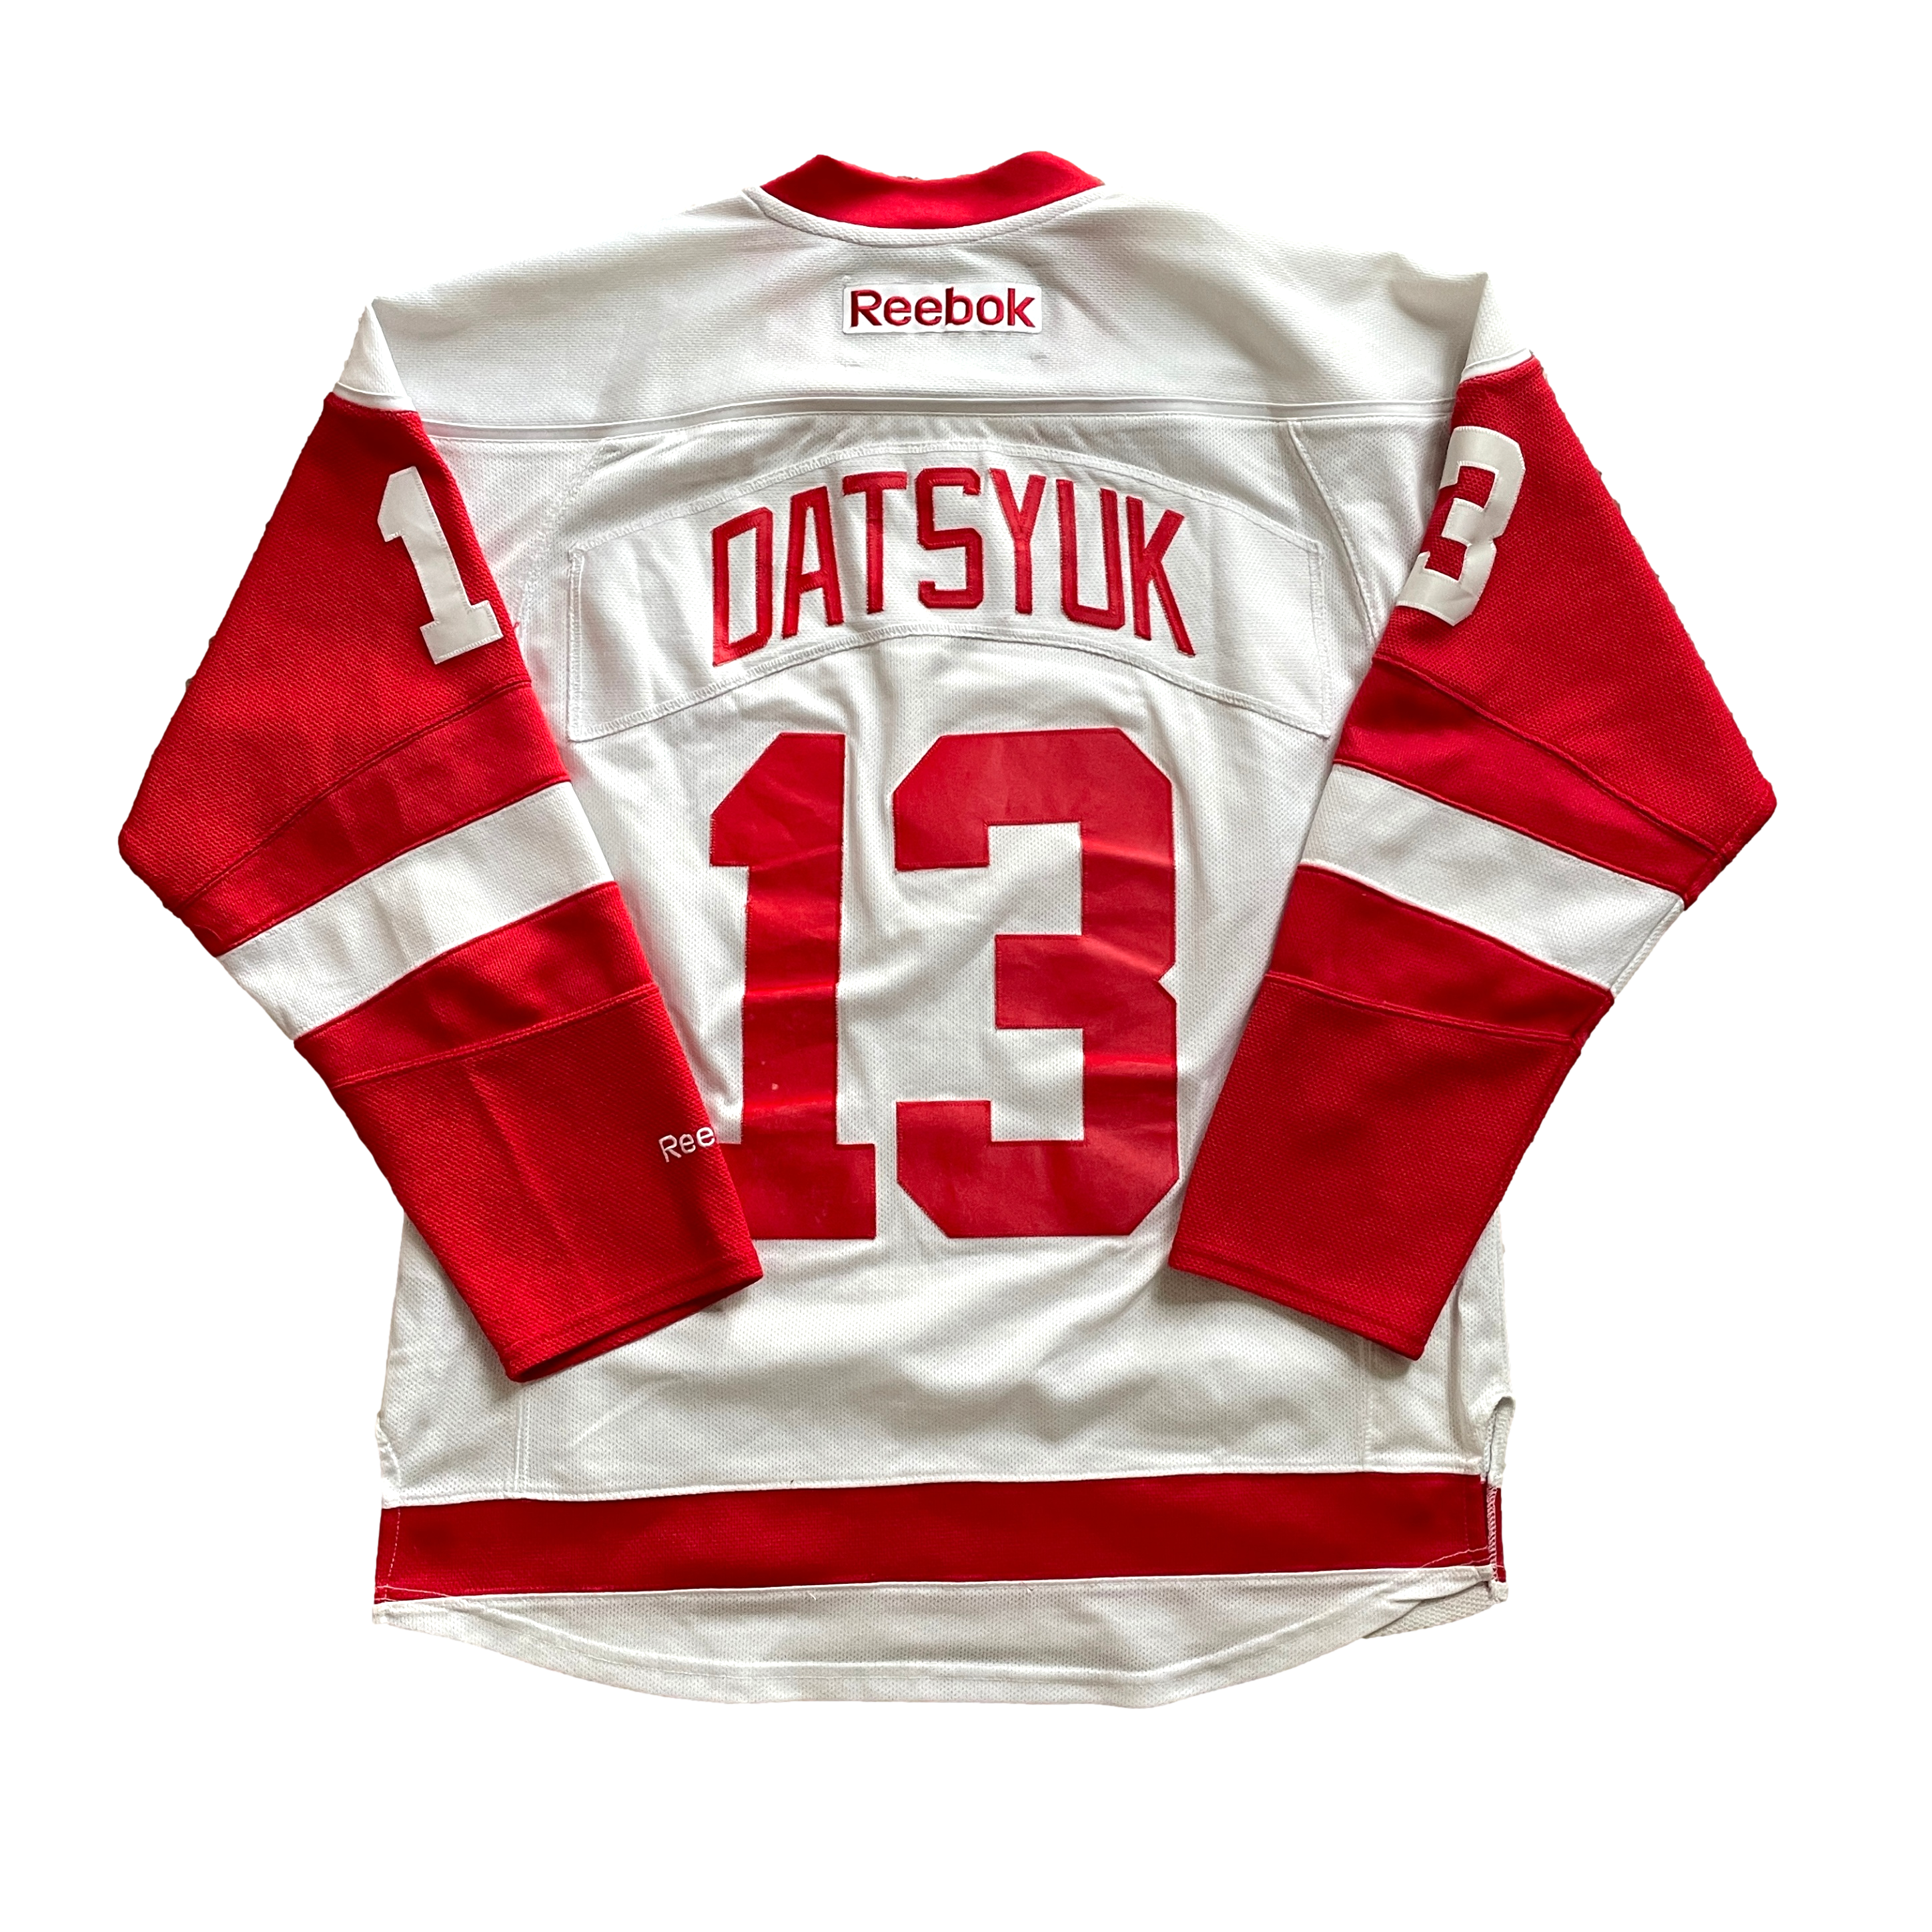 Detroit Red Wings NHL Hockey Jersey (M)